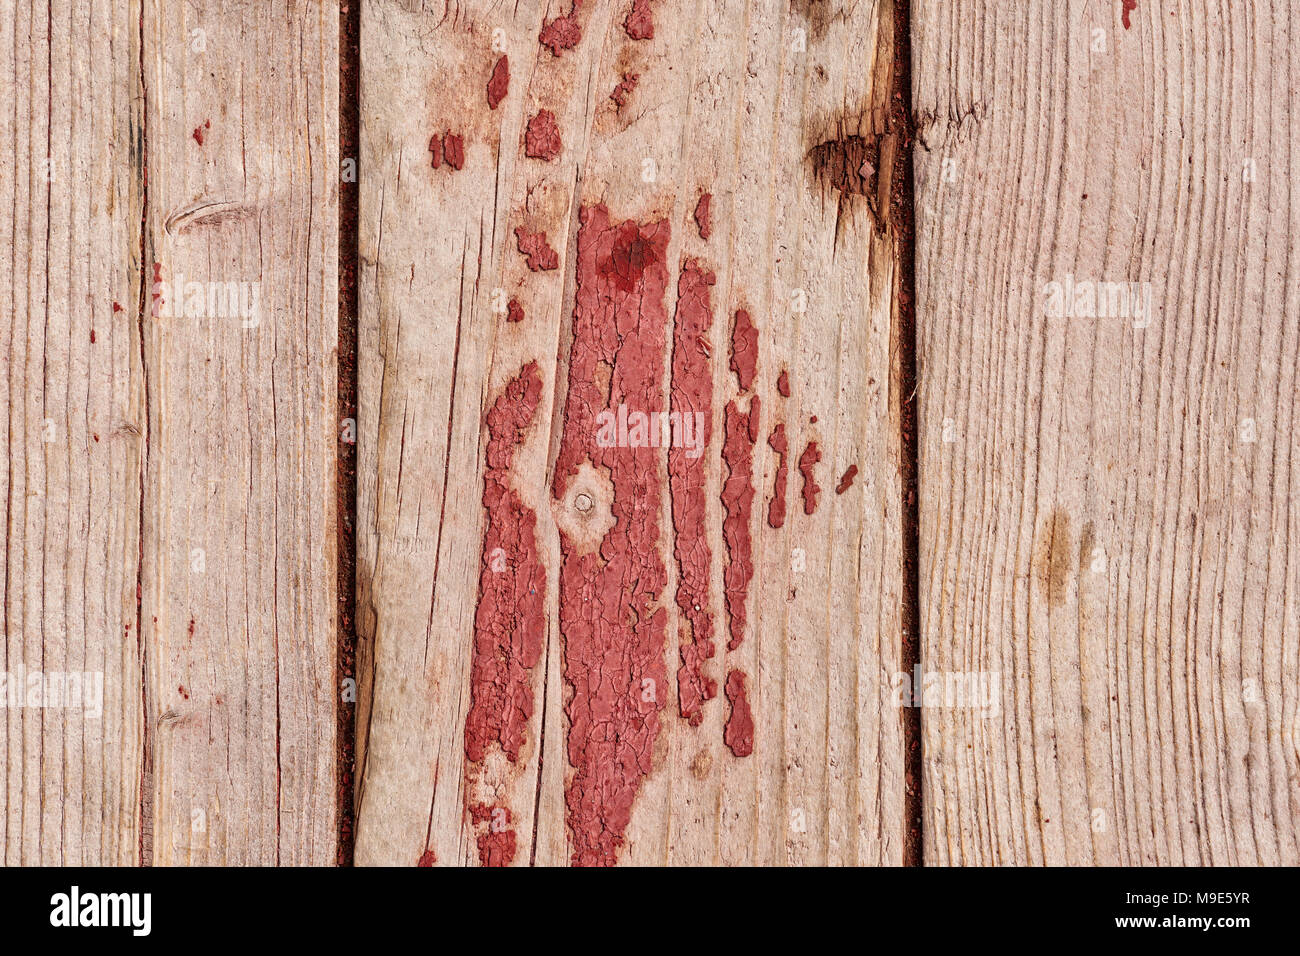 Grunge, weathered vertical wooden planks with a traces of old red or purple paint, nail heads visible Stock Photo